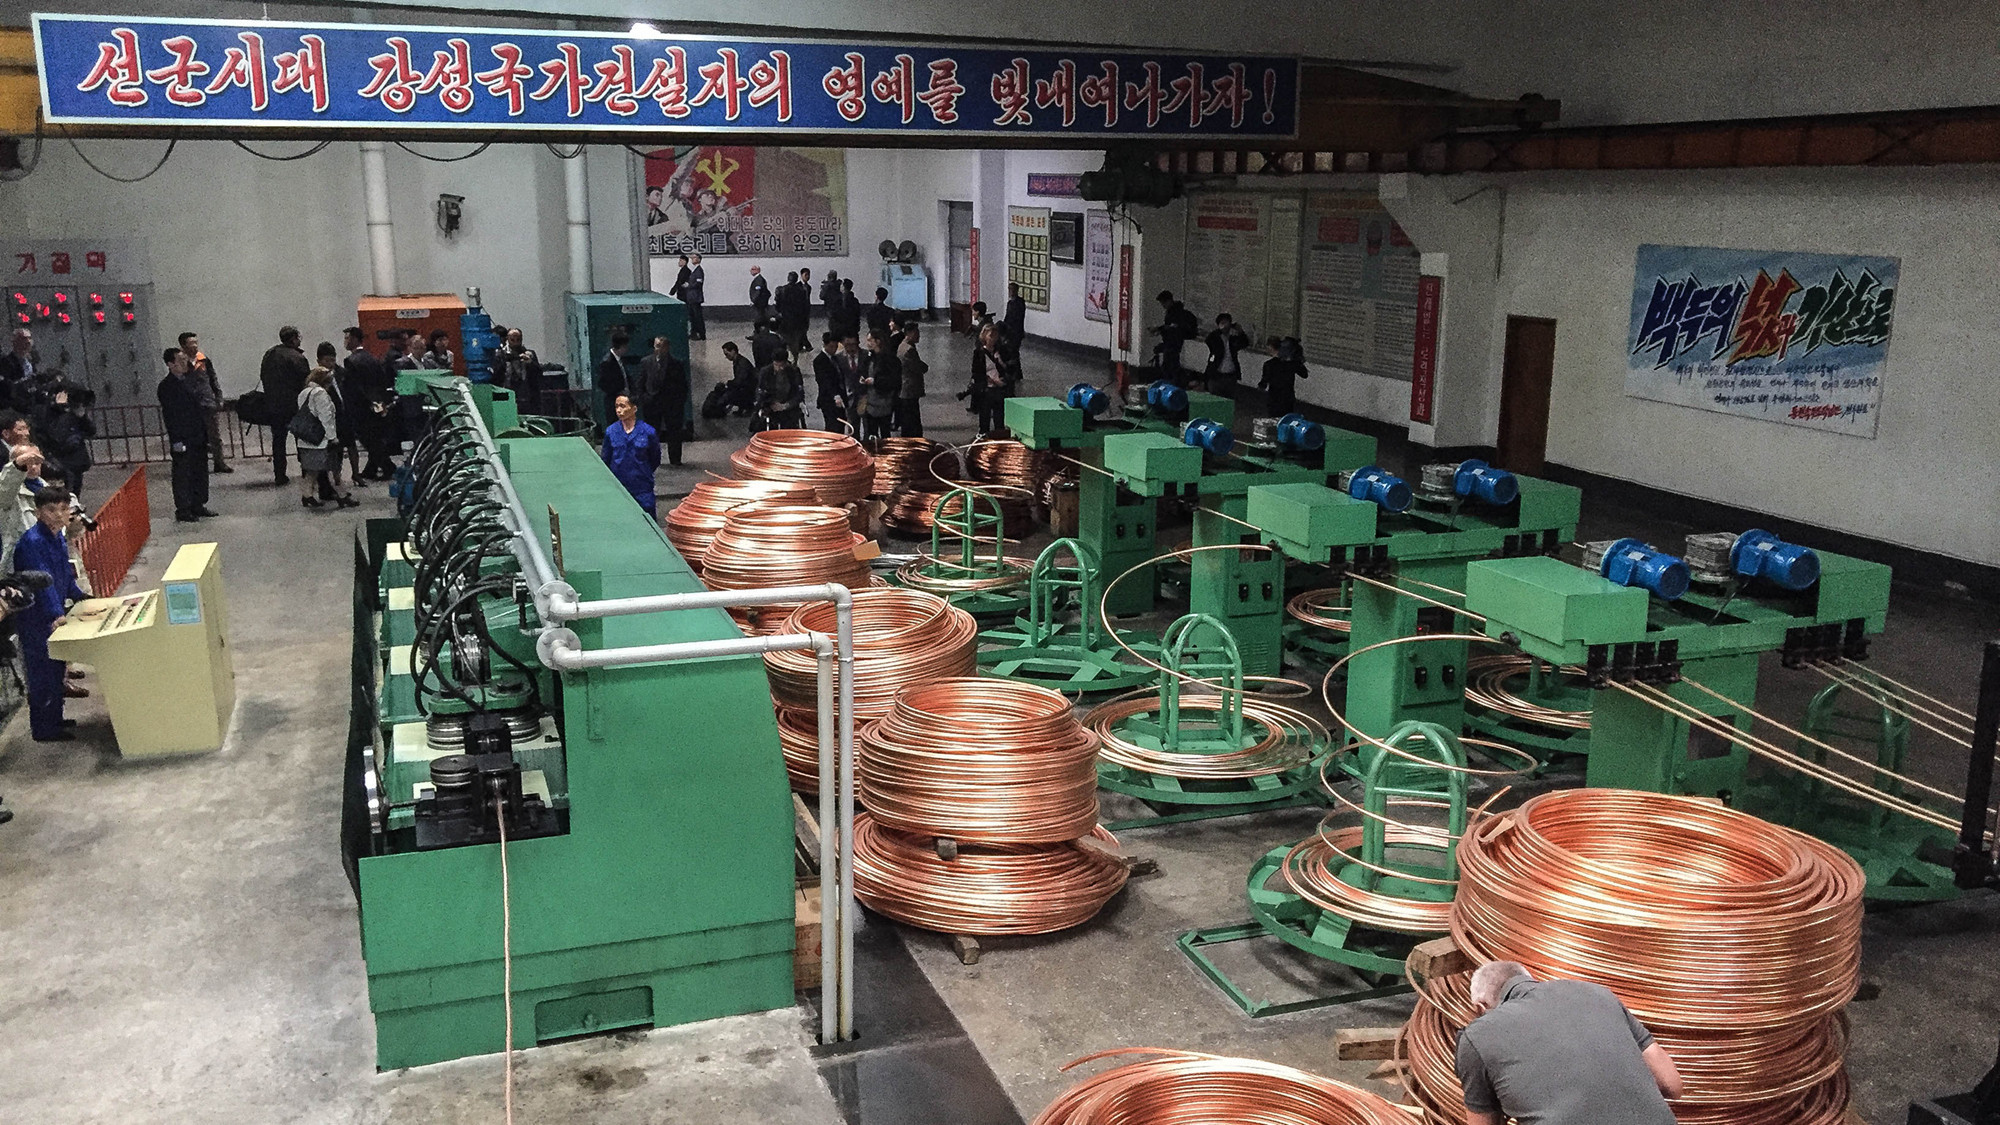 A tour of the Pyongyang 326 Electric Cable Factory - Chicago Tribune